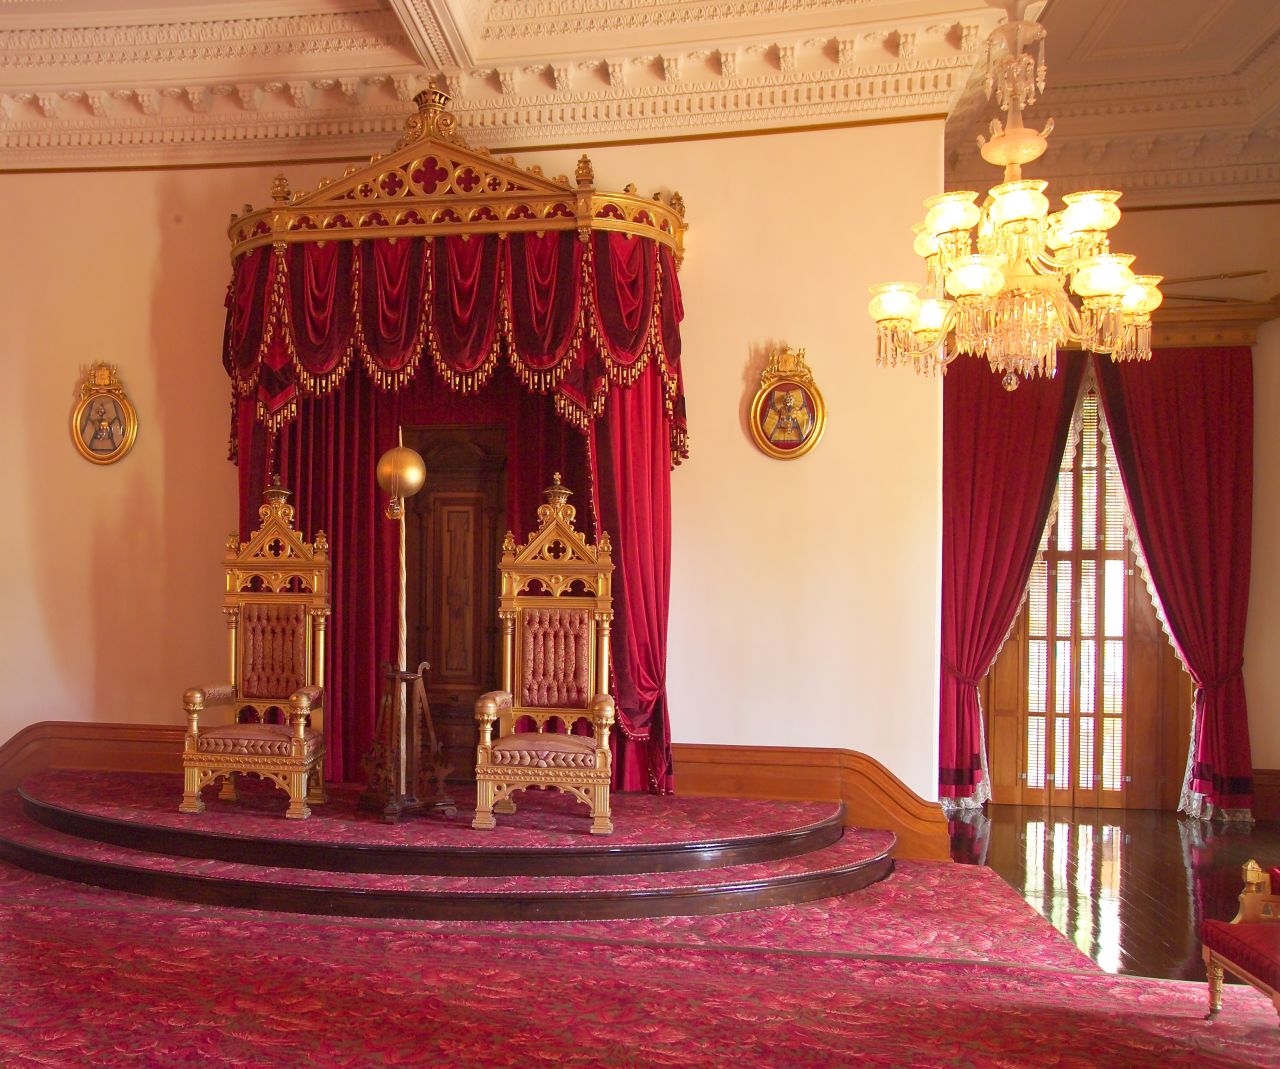 Yes, we've got thrones, too. ('Iolani Palace)